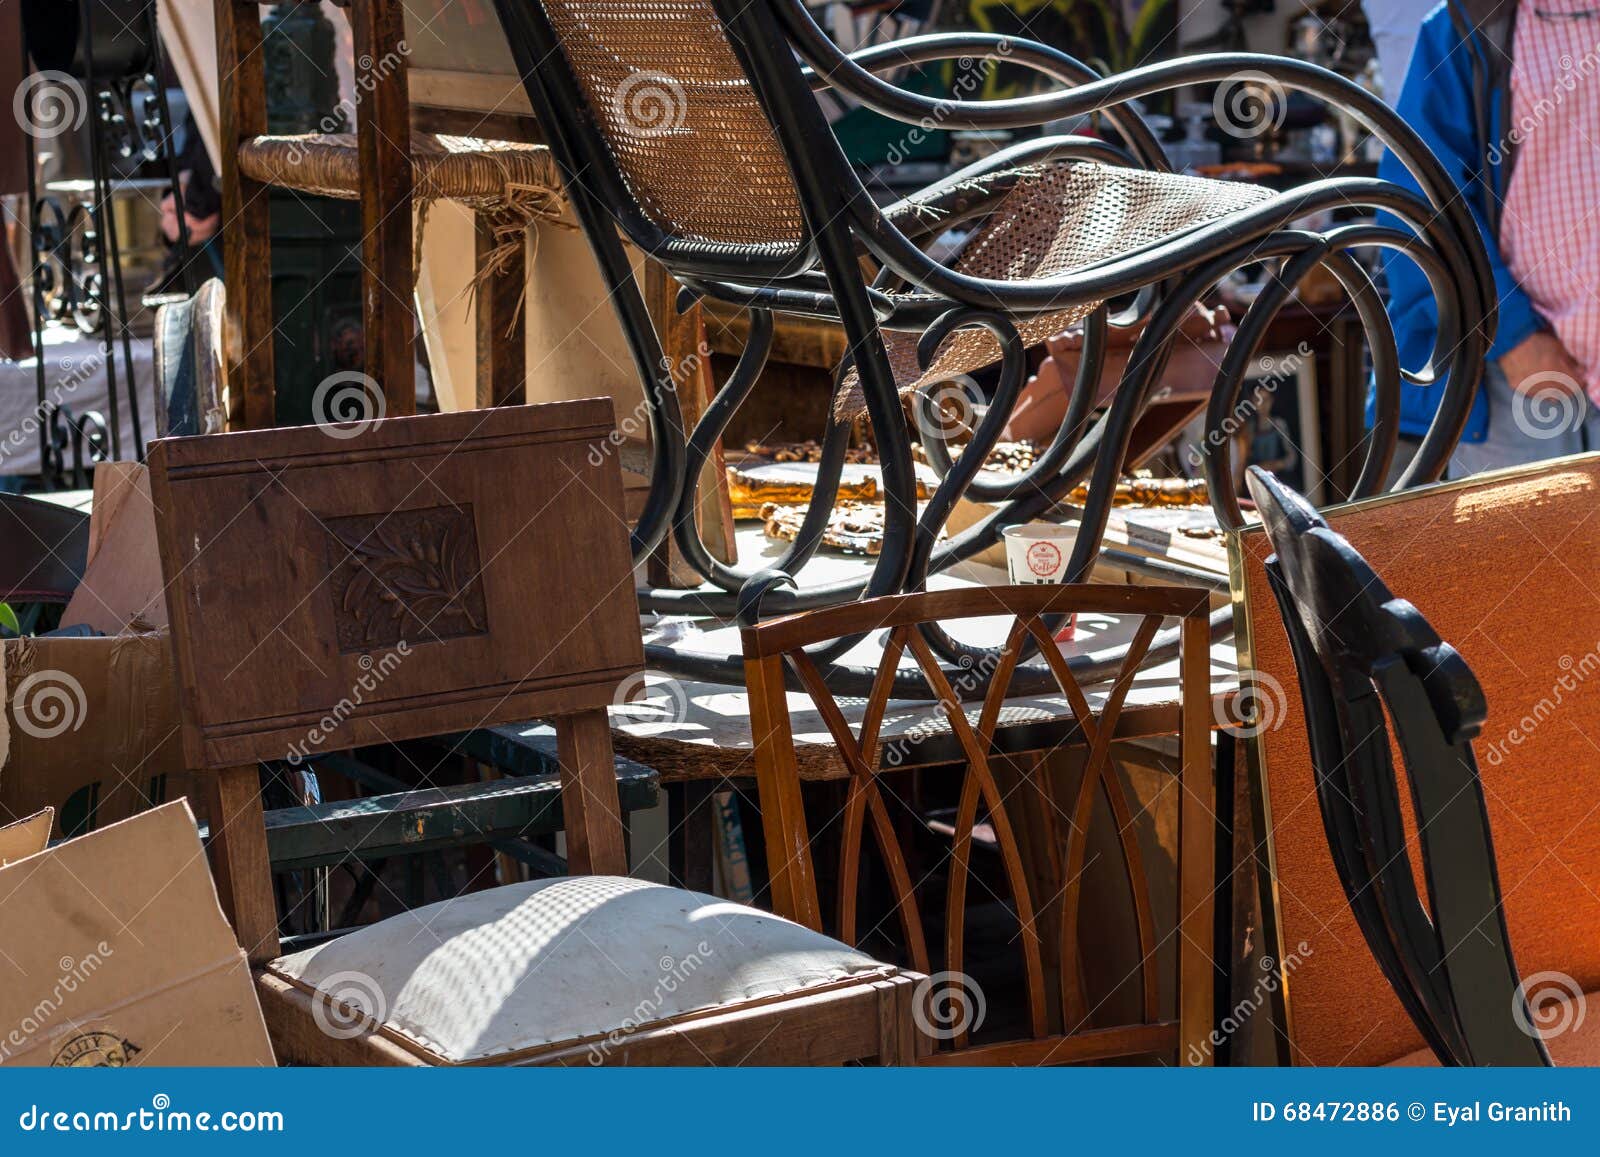 Pile Of Chairs In The Street Stock Photo Image Of Empty Outside